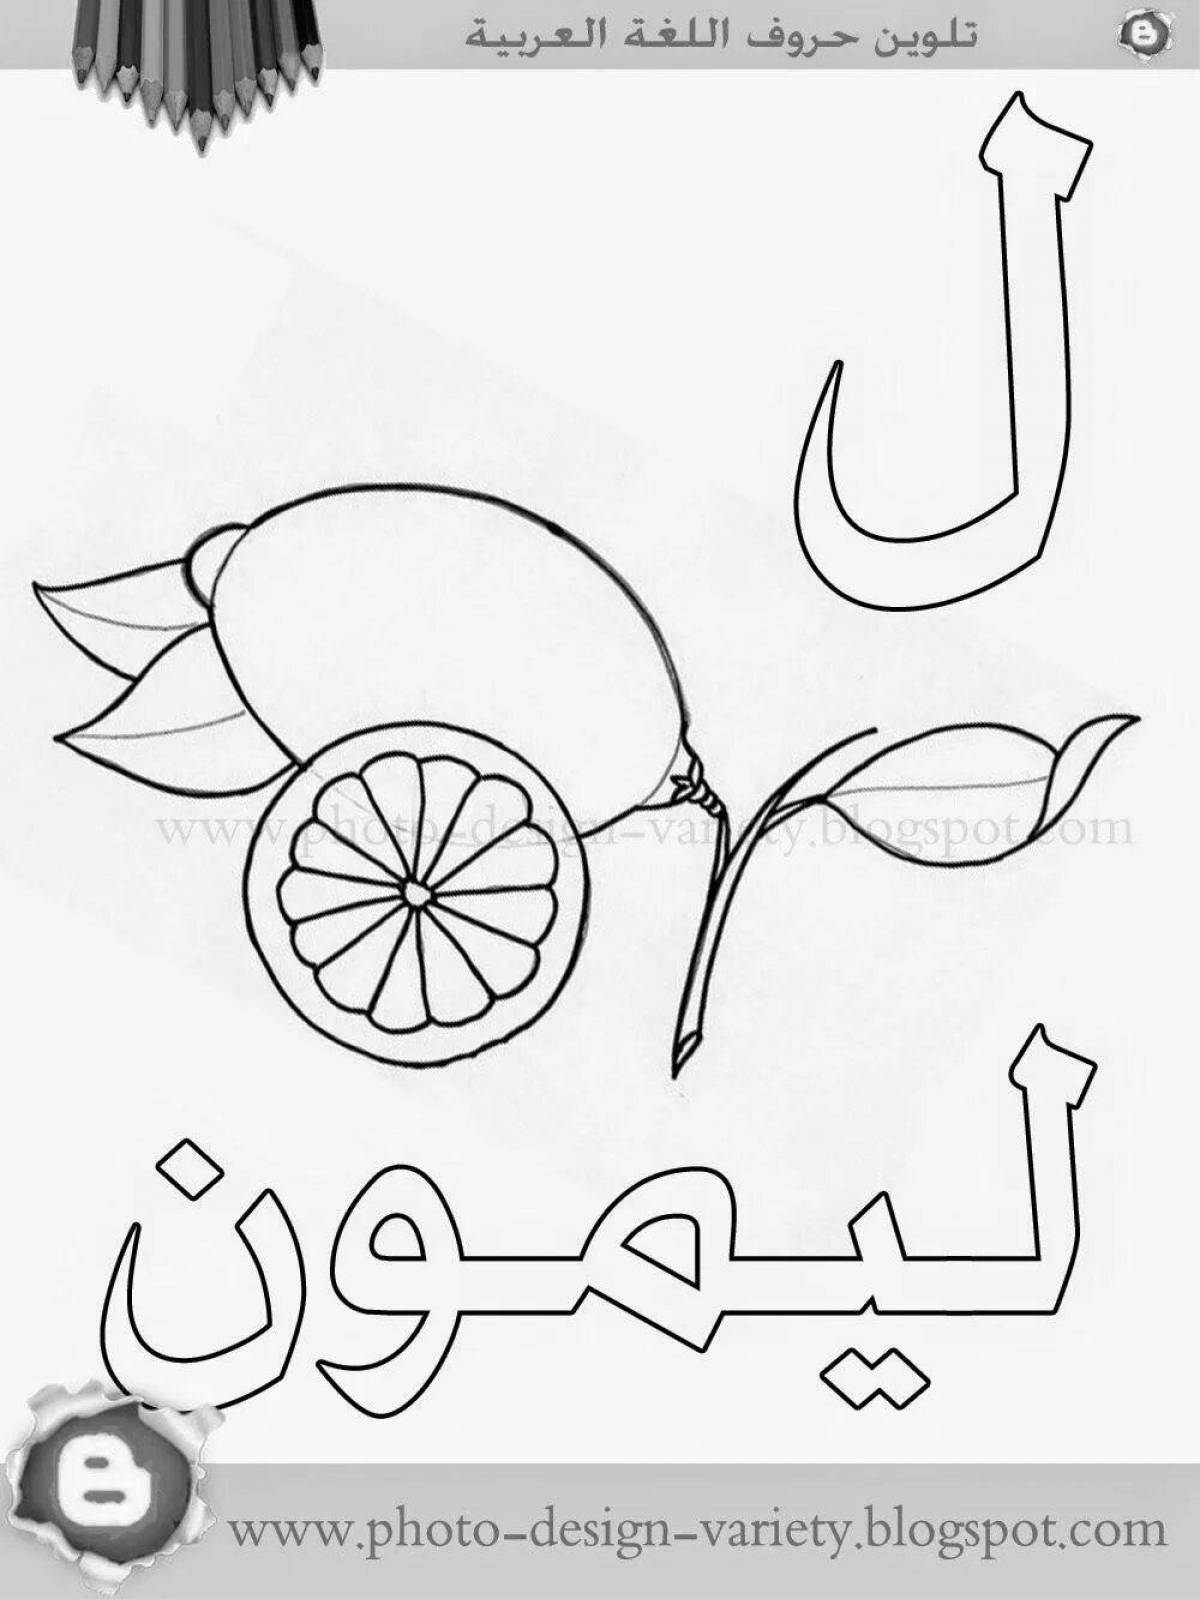 Blissful arabic coloring book